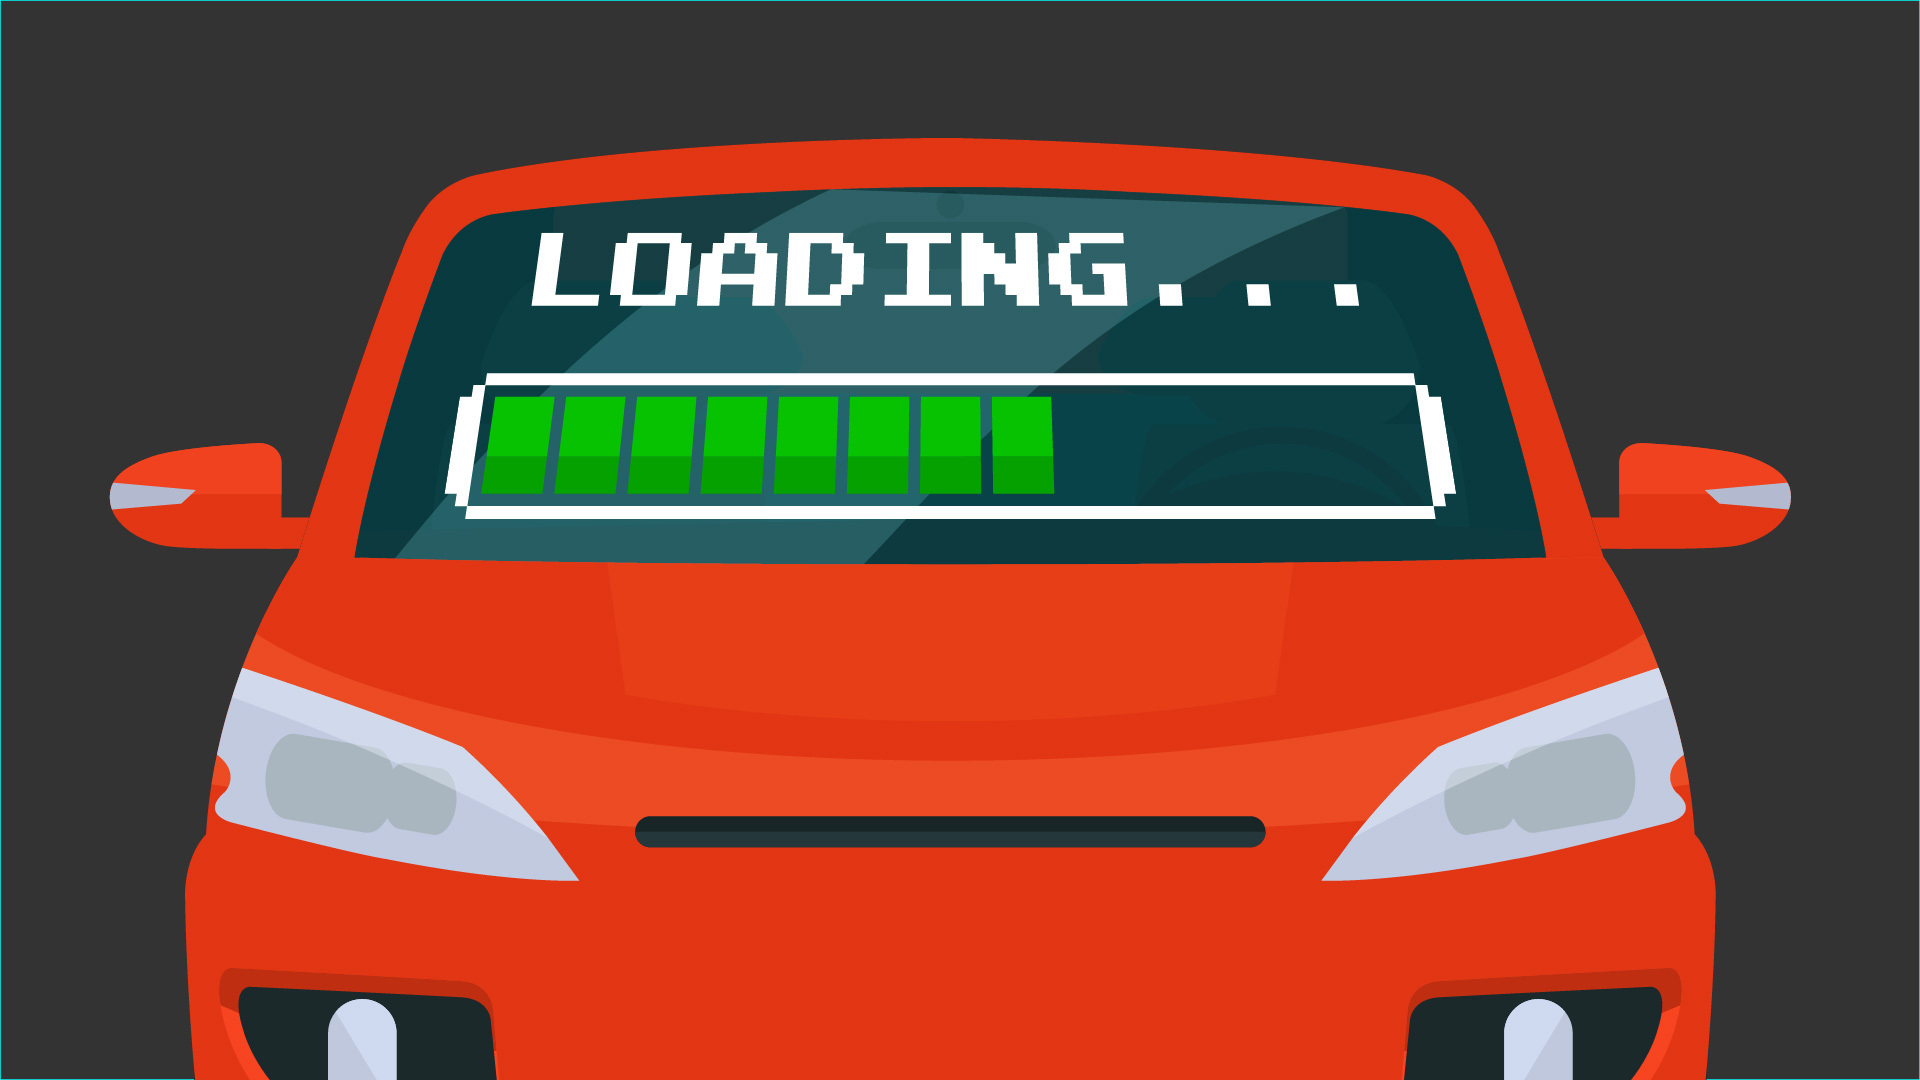 An illustration of a red car with a loading bar on the windshield.